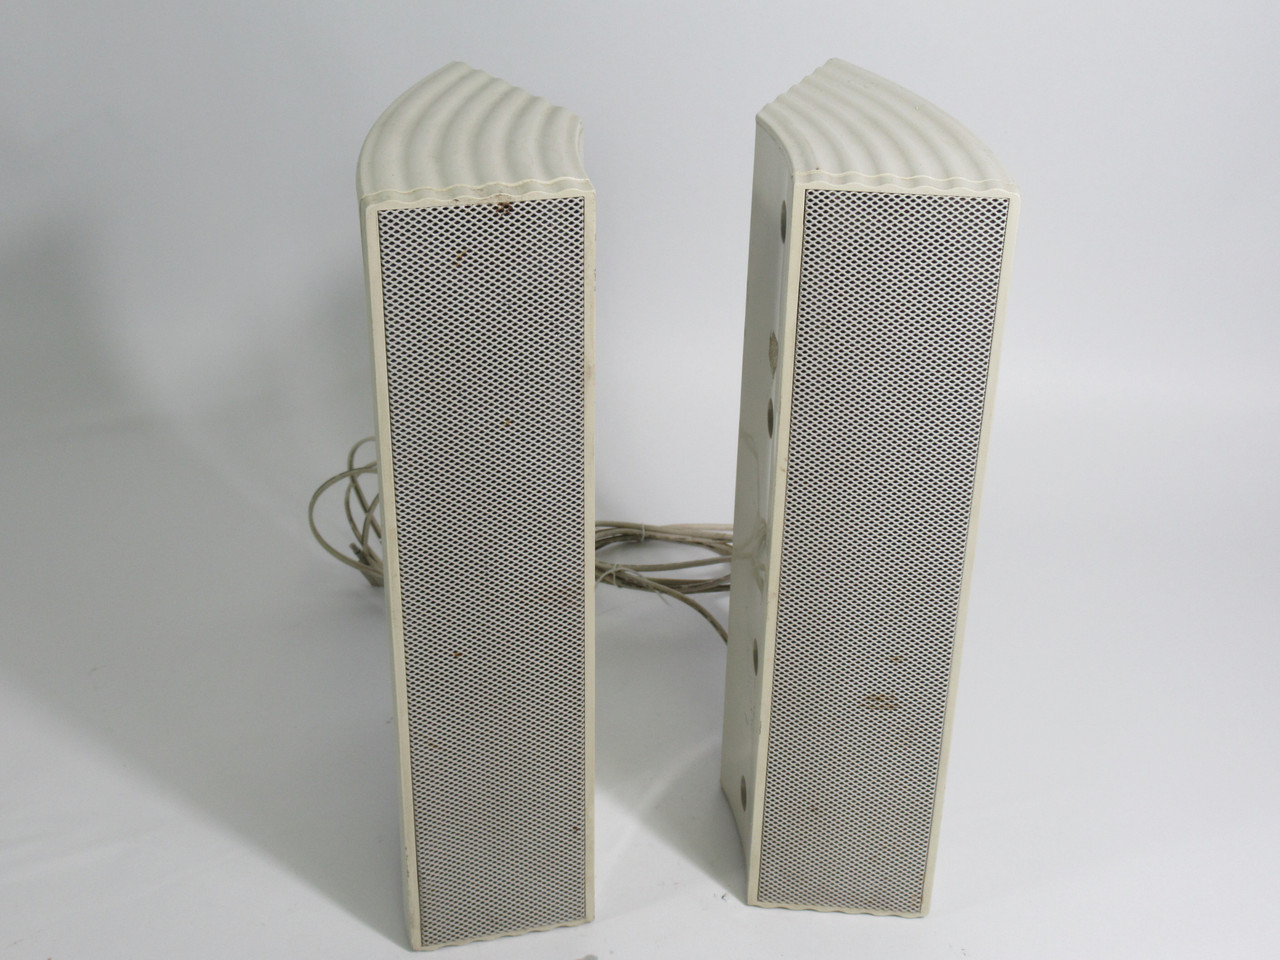 BBE PHSP63928380 High Definition Computer Speaker Pair NO POWER SUPPLY USED